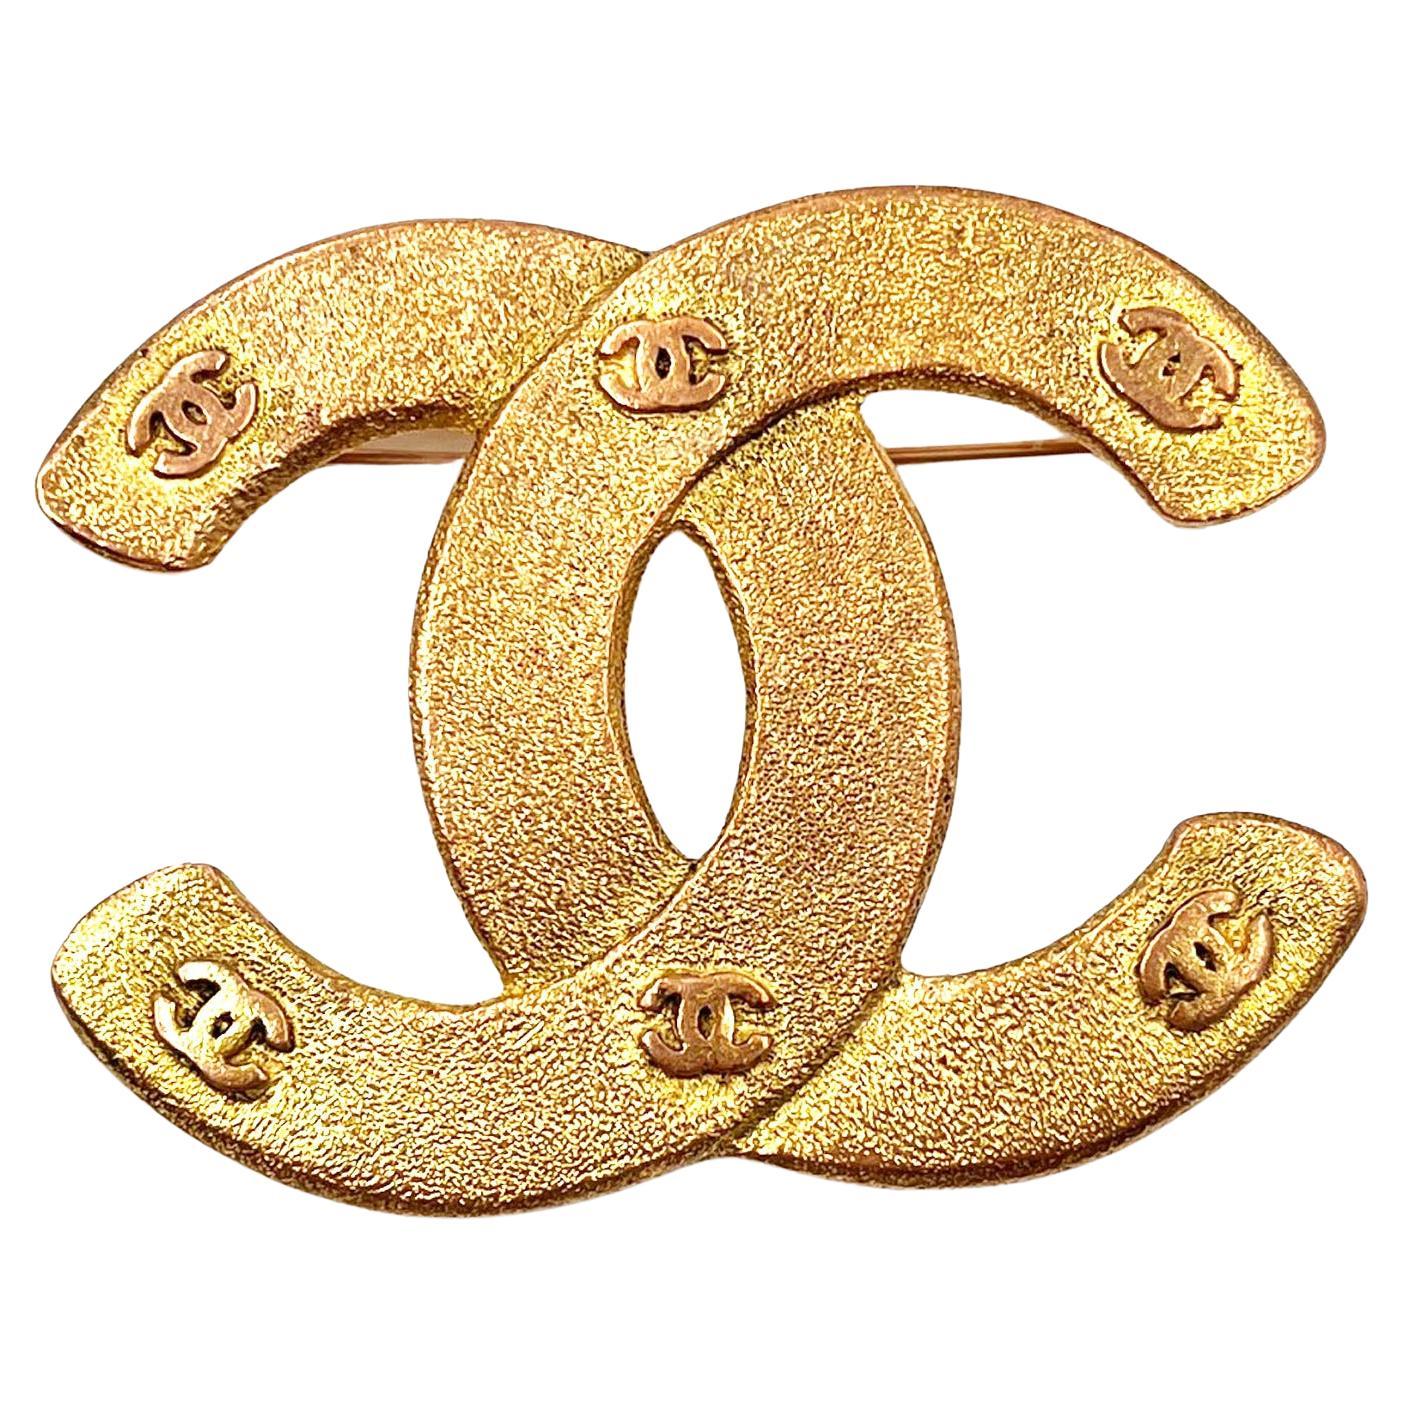 Chanel Vintage Gold Plated Matte CC Mini CC Large Brooch